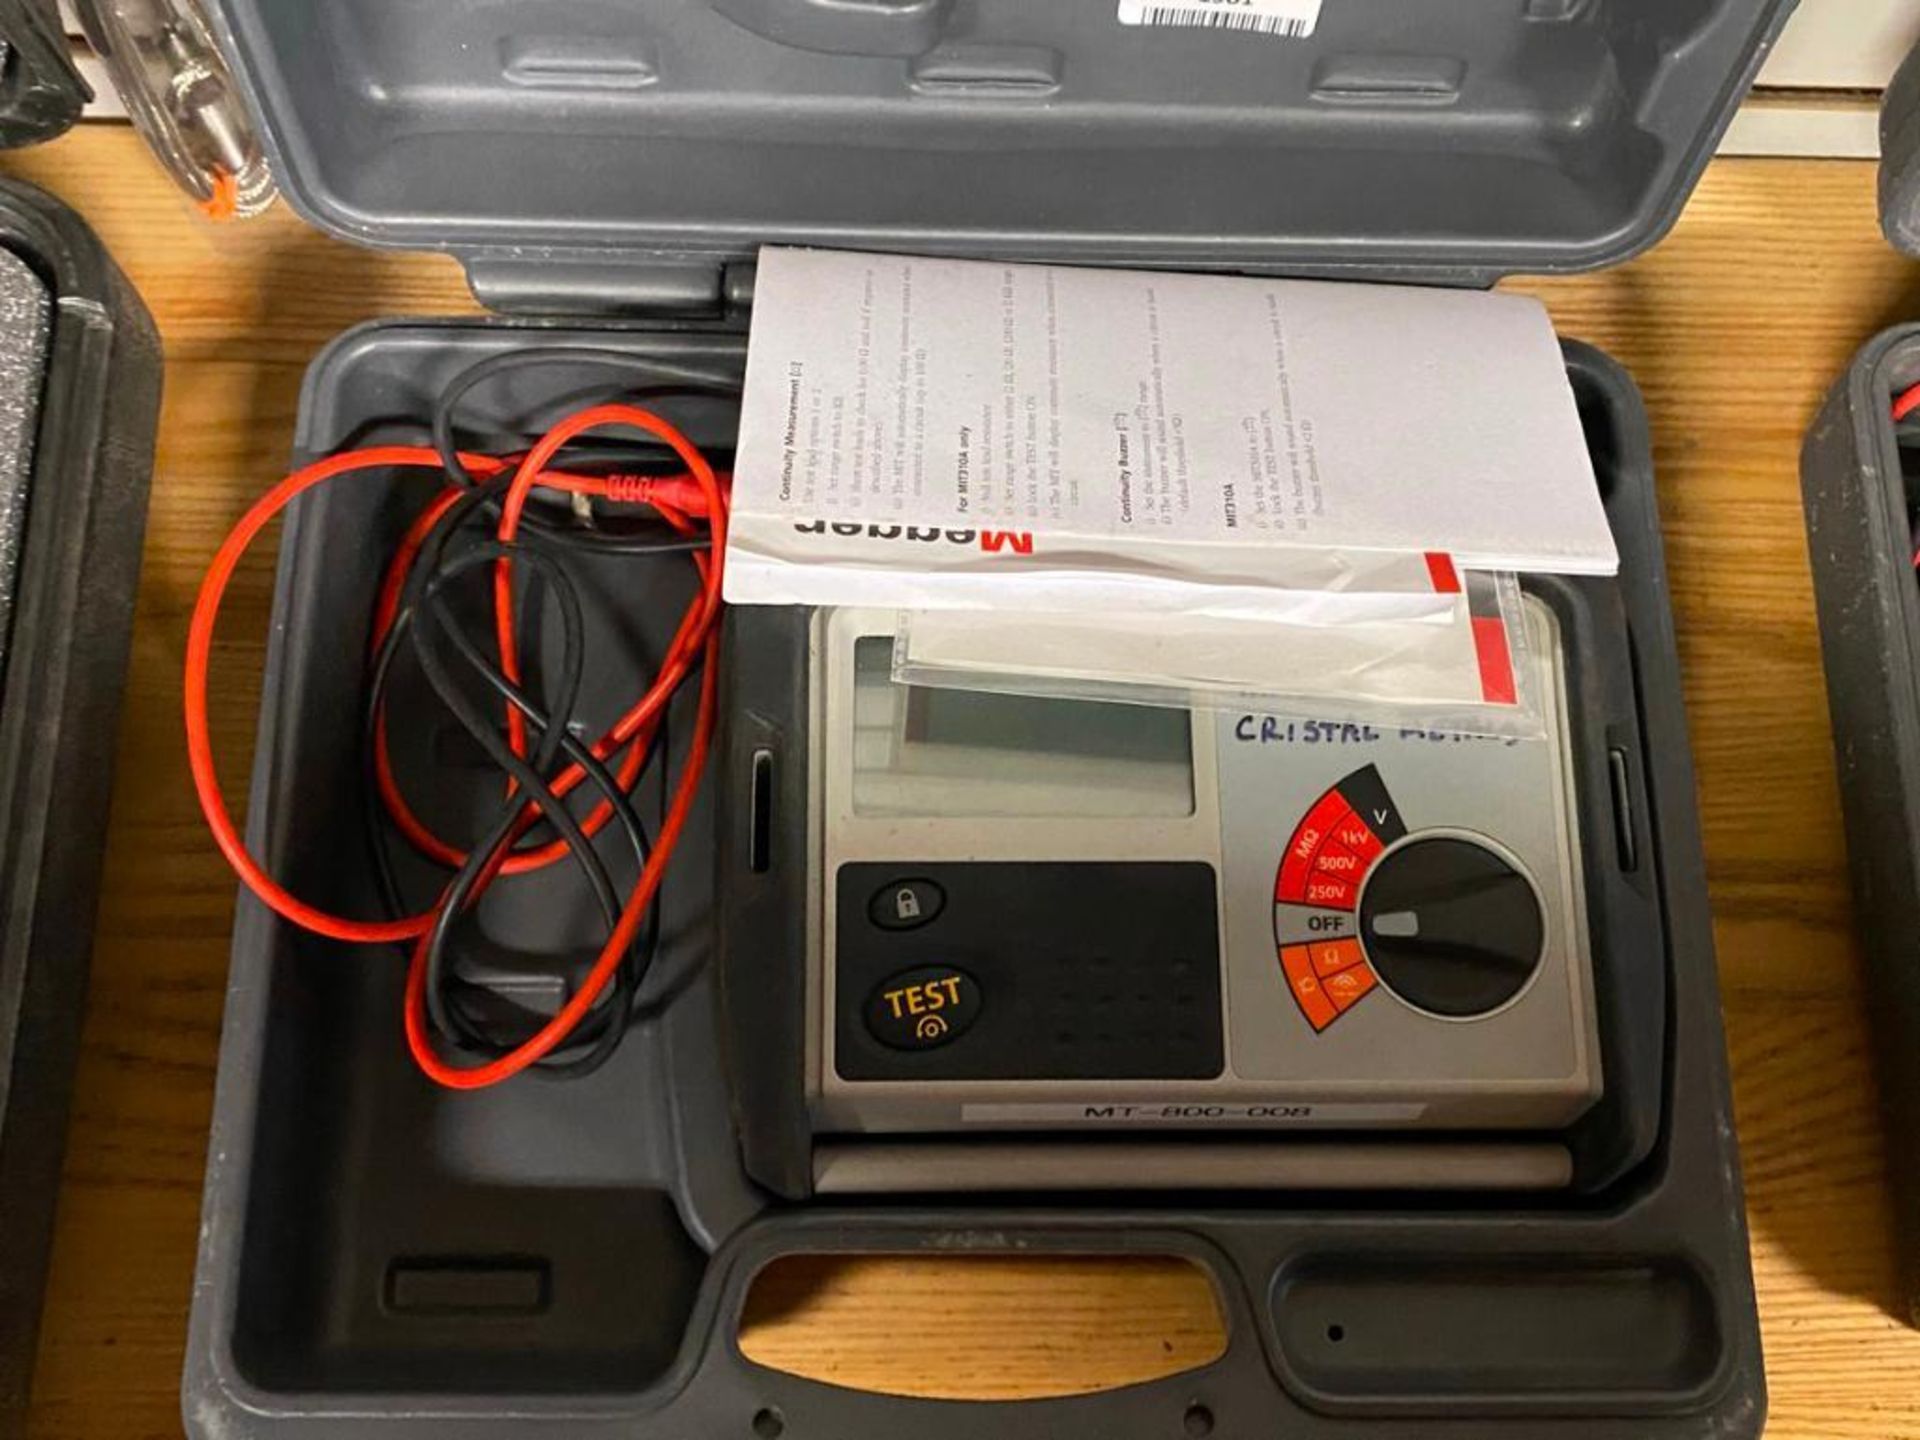 Megger Model Mit310 Insulation And Continuity Tester - Image 2 of 2